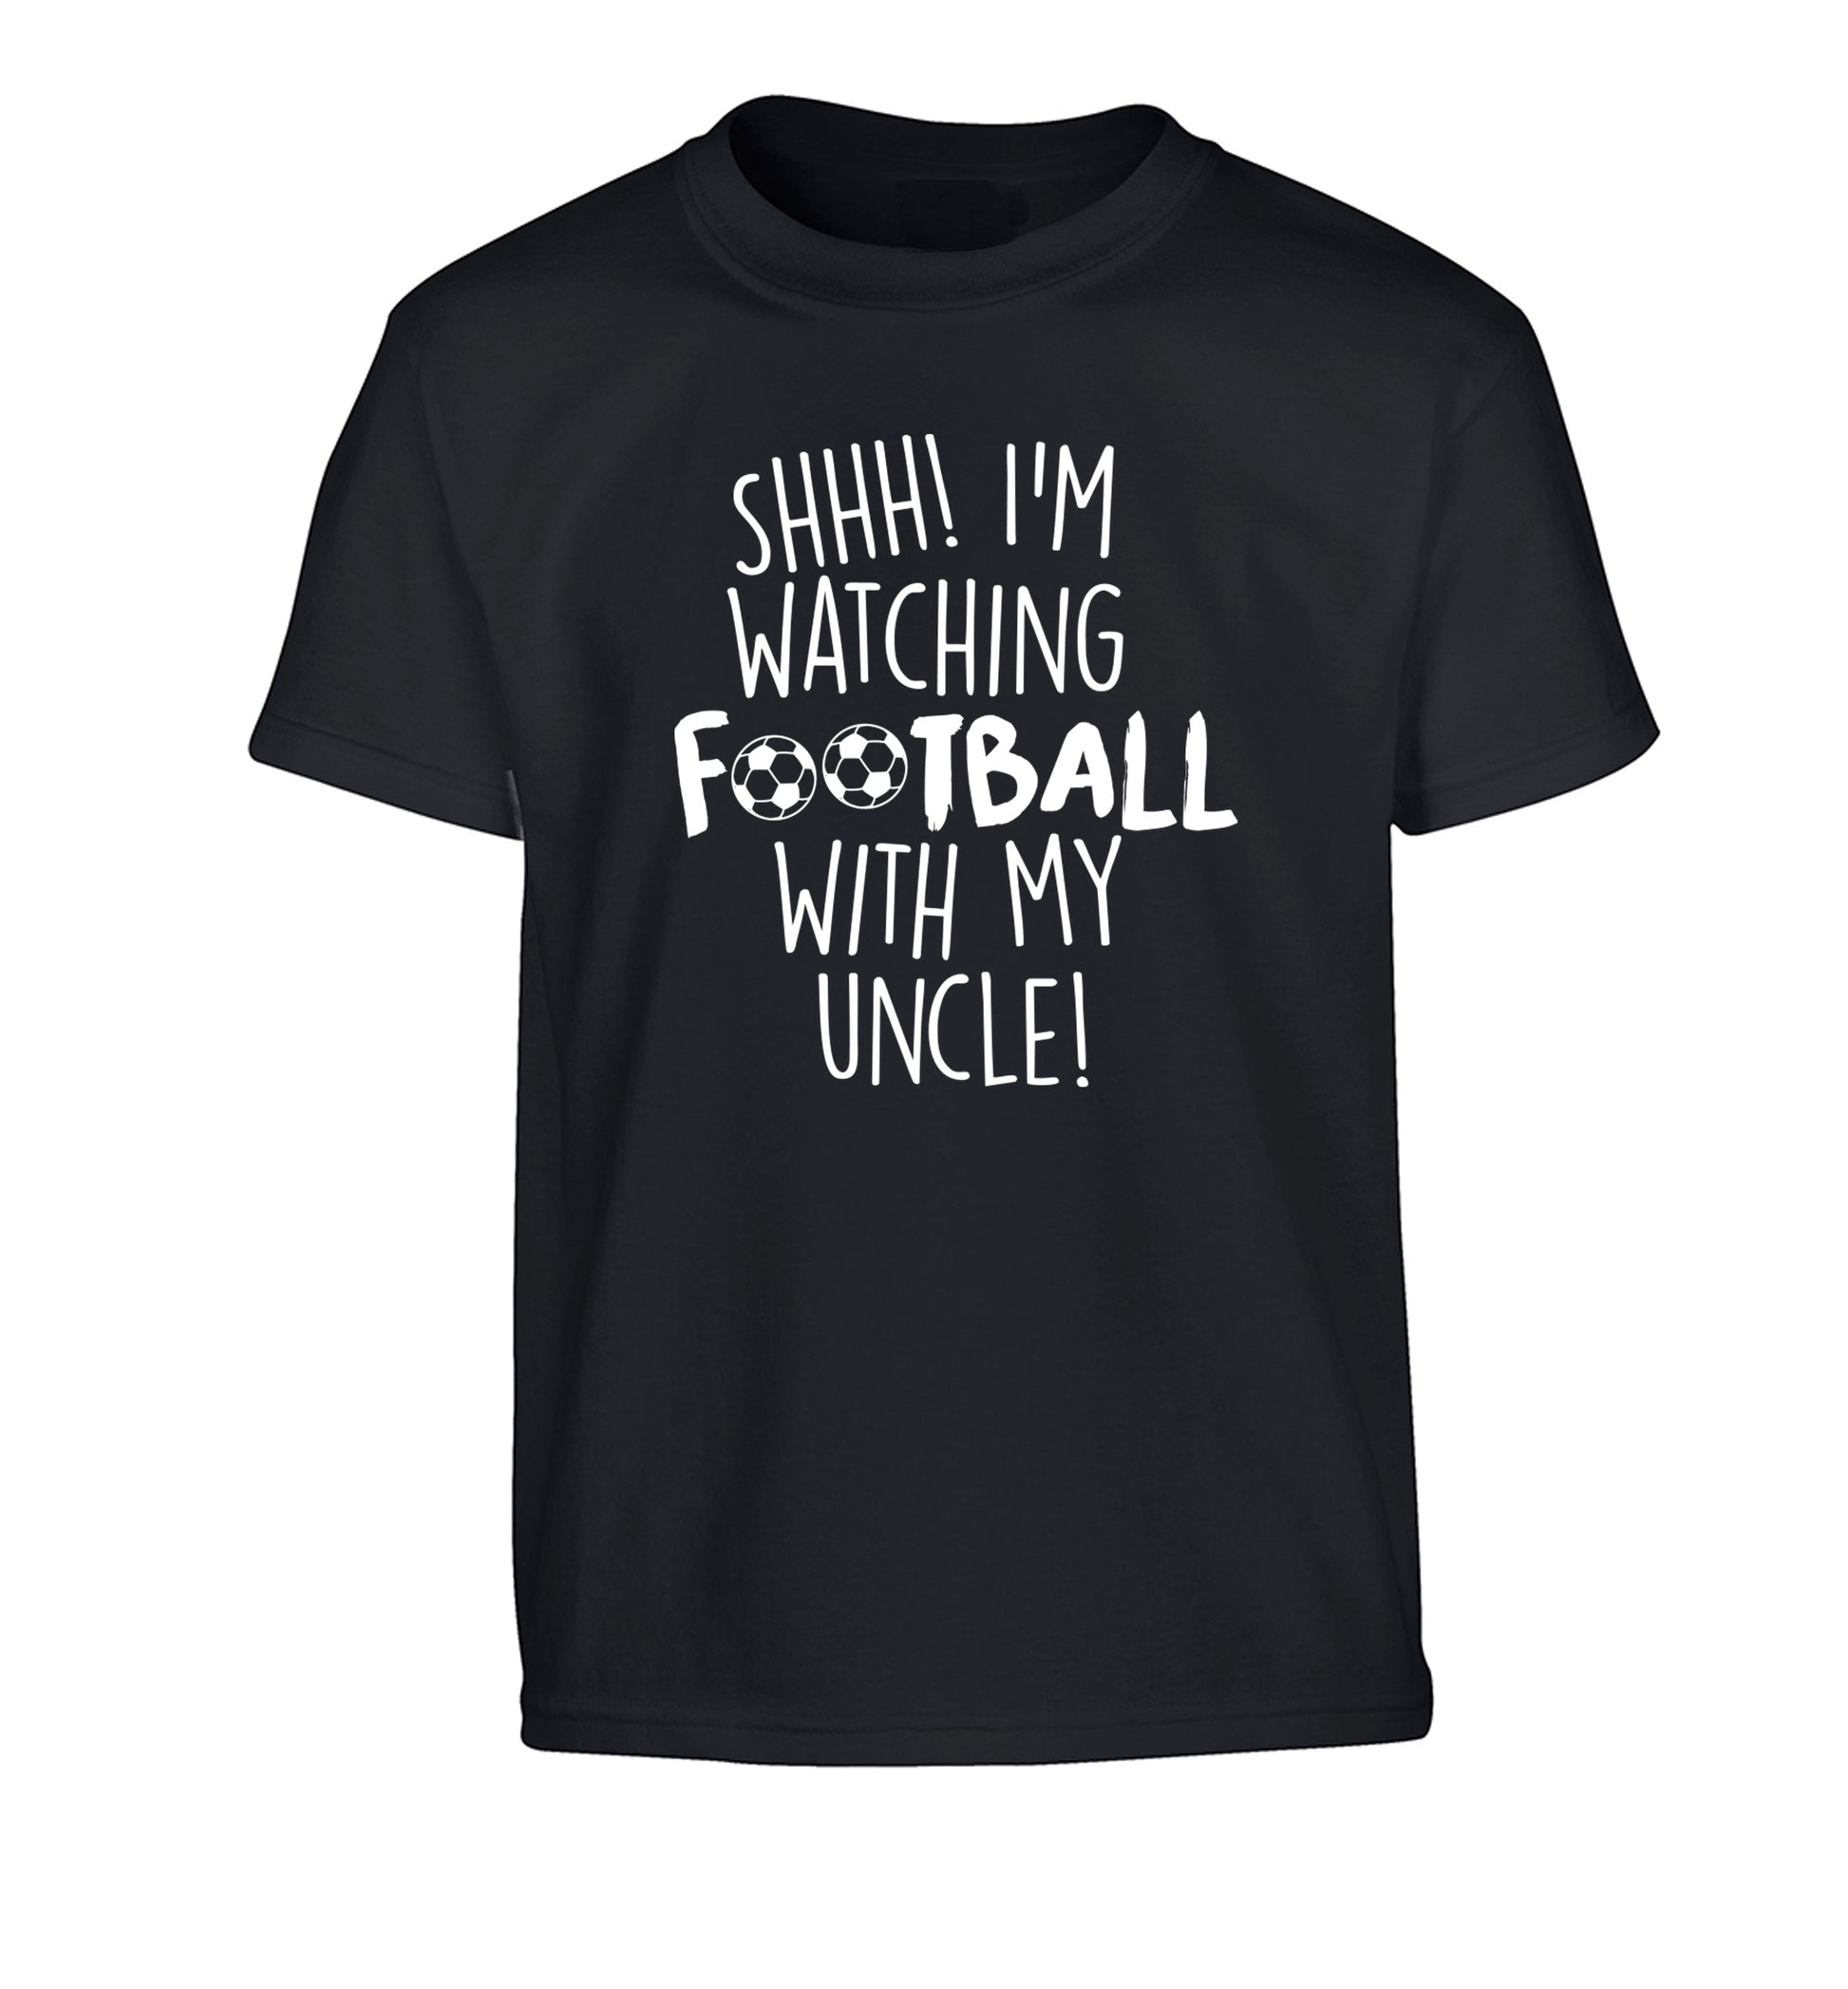 Shhh I'm watching football with my uncle Children's black Tshirt 12-14 Years